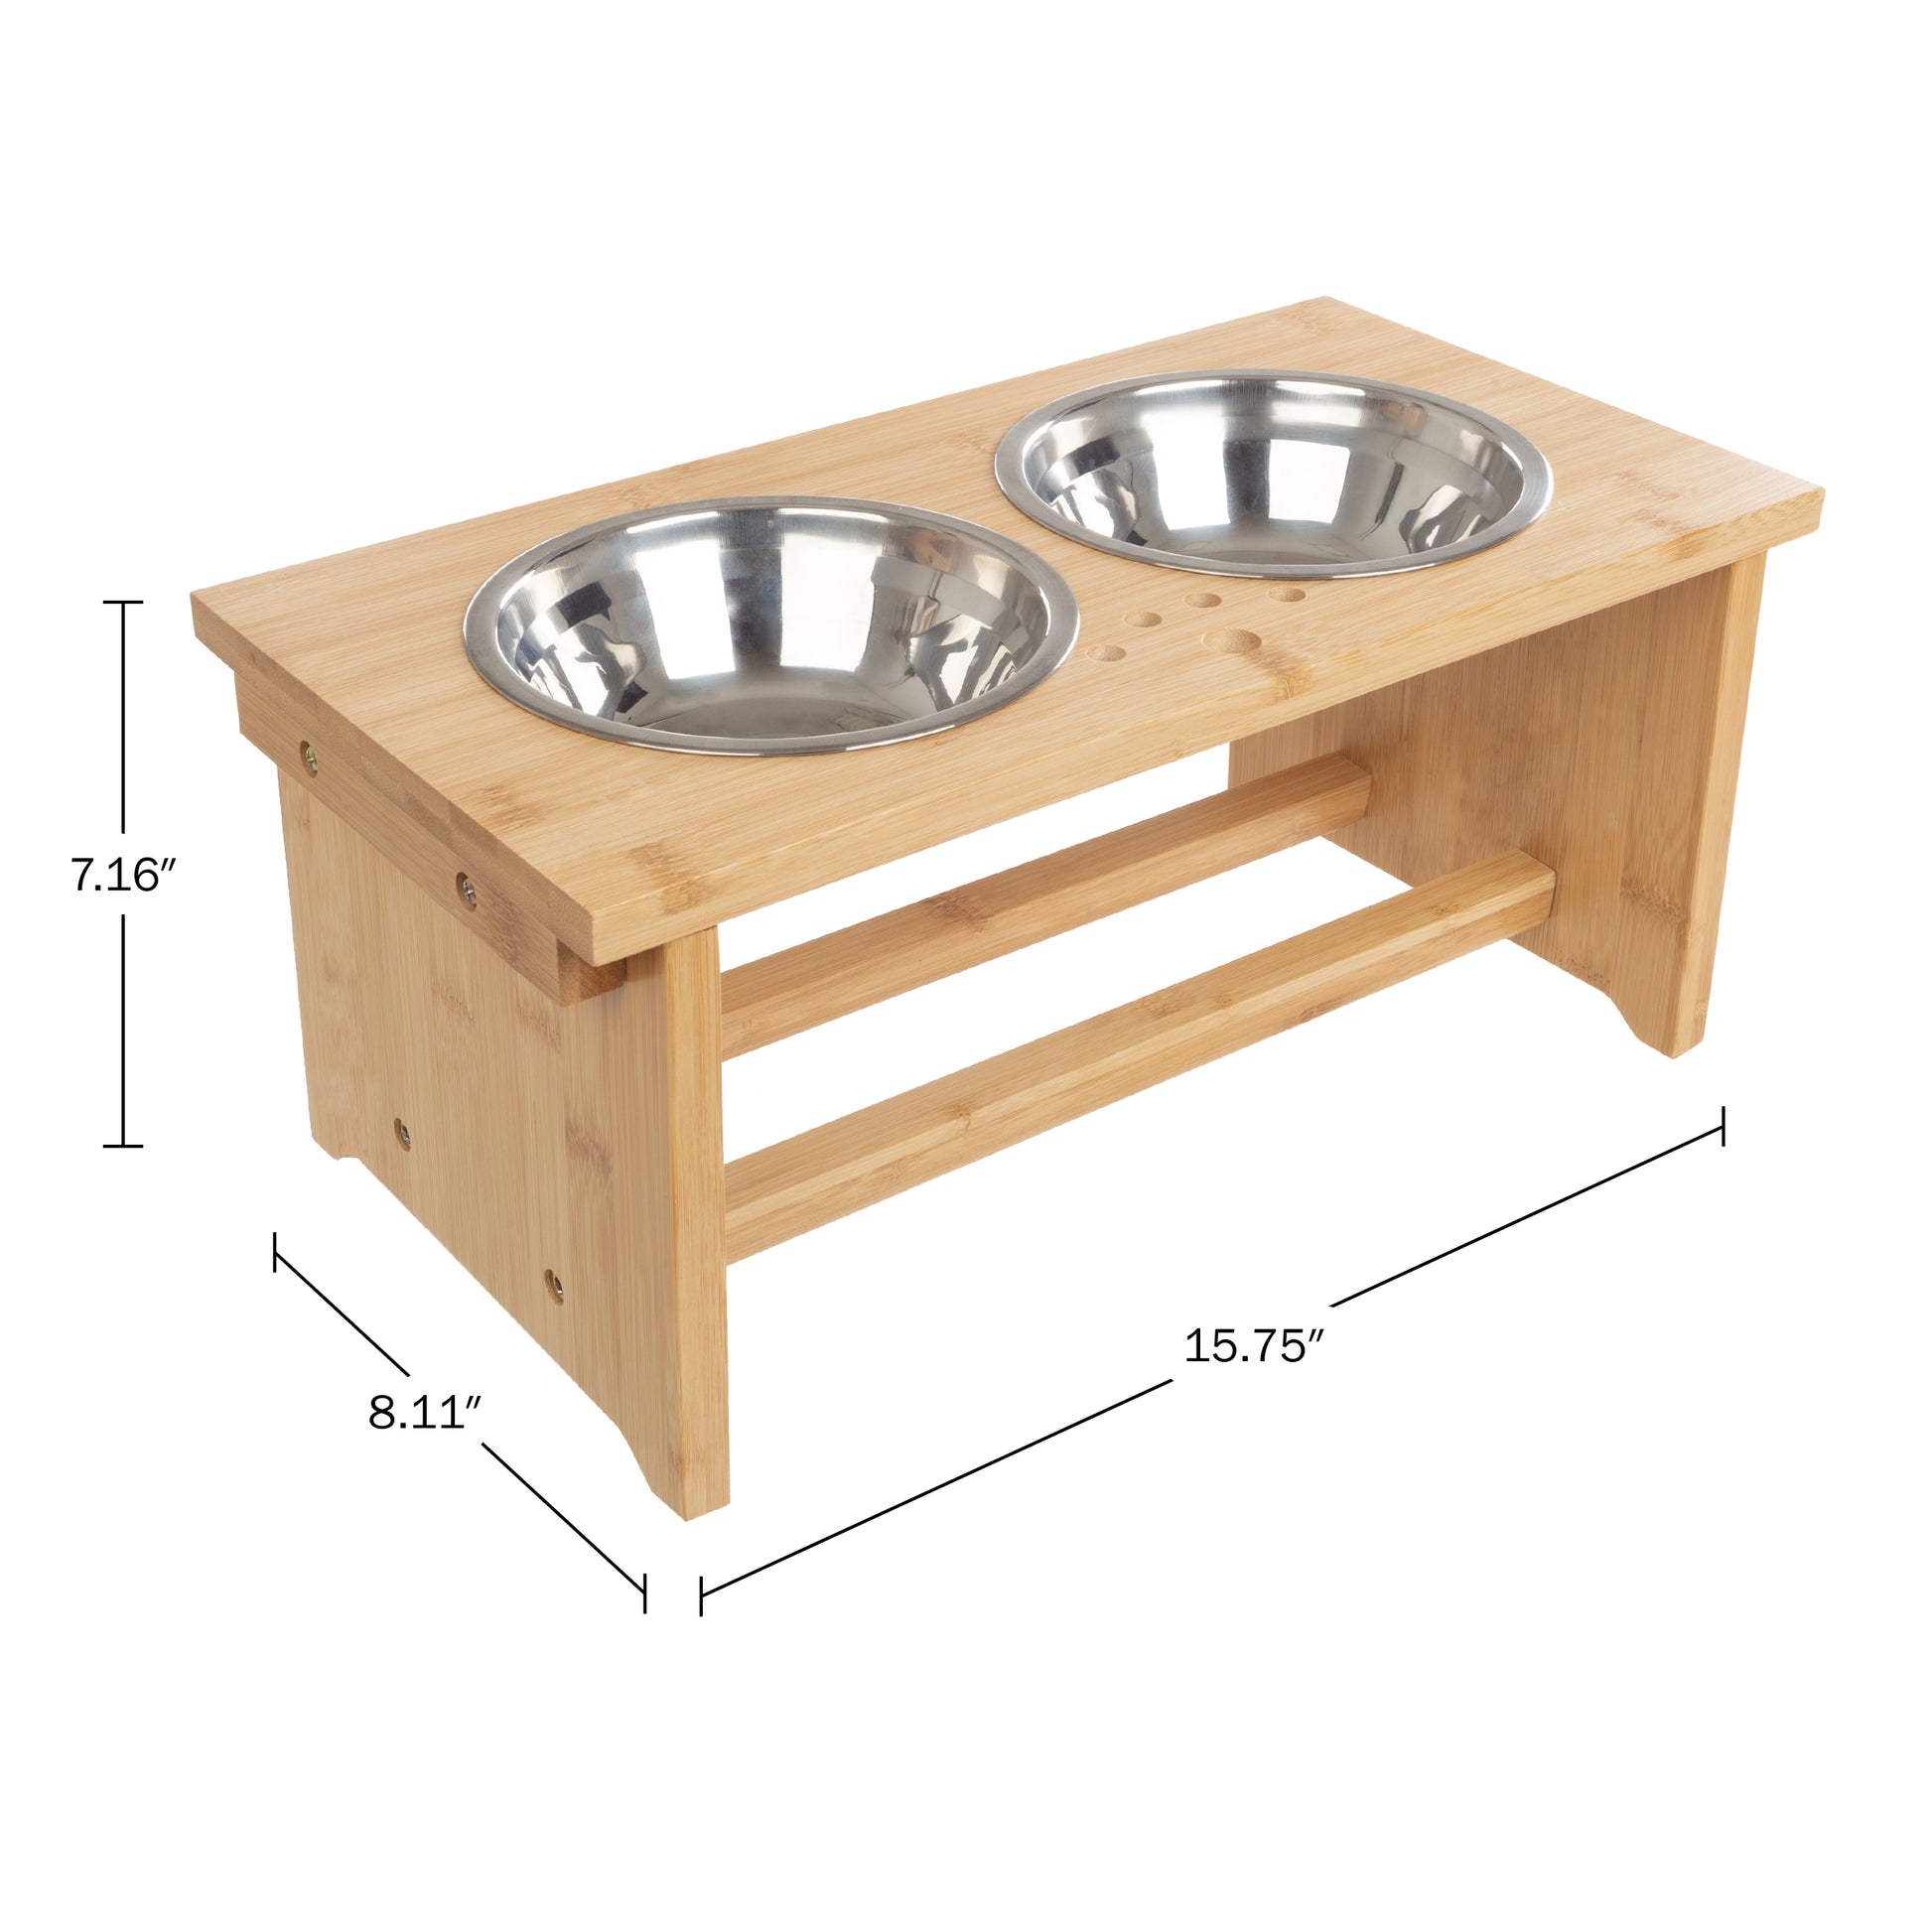 Petmaker Feeding Tray with Hidden Storage Space Elevated Feeder